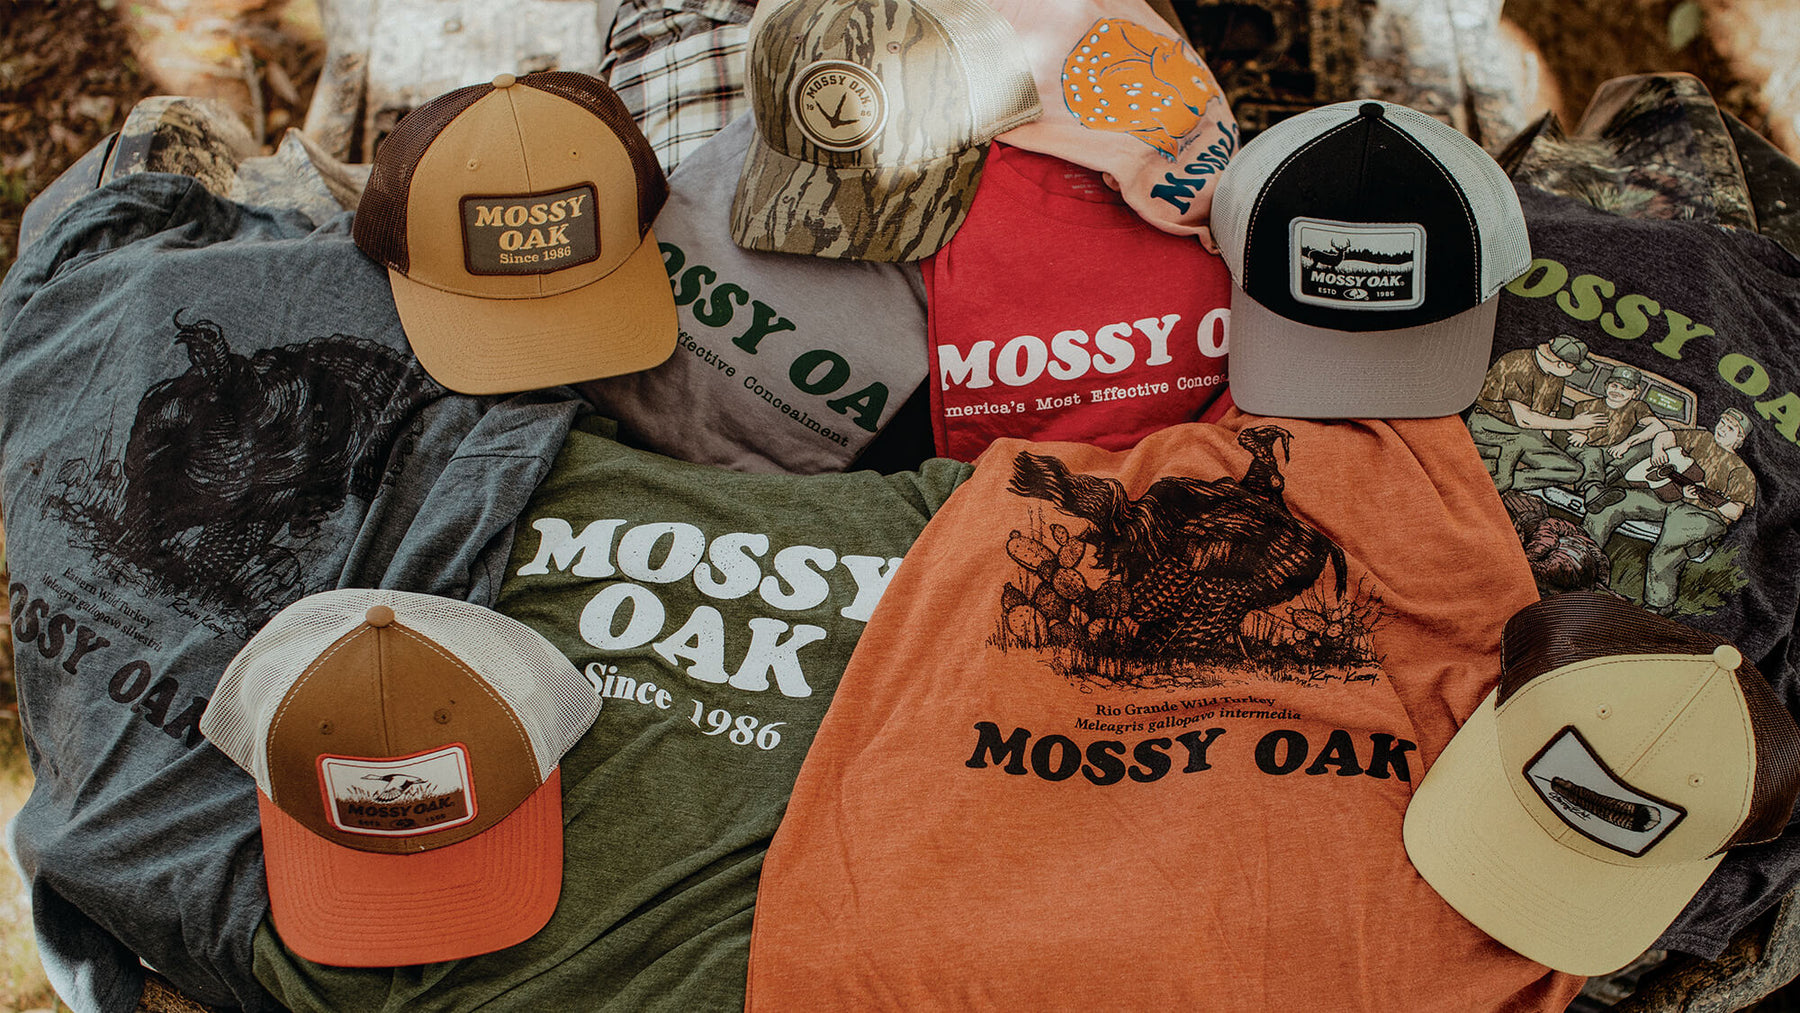 Mossy Oak Heathered Grey Trucker Hat at Tractor Supply Co.